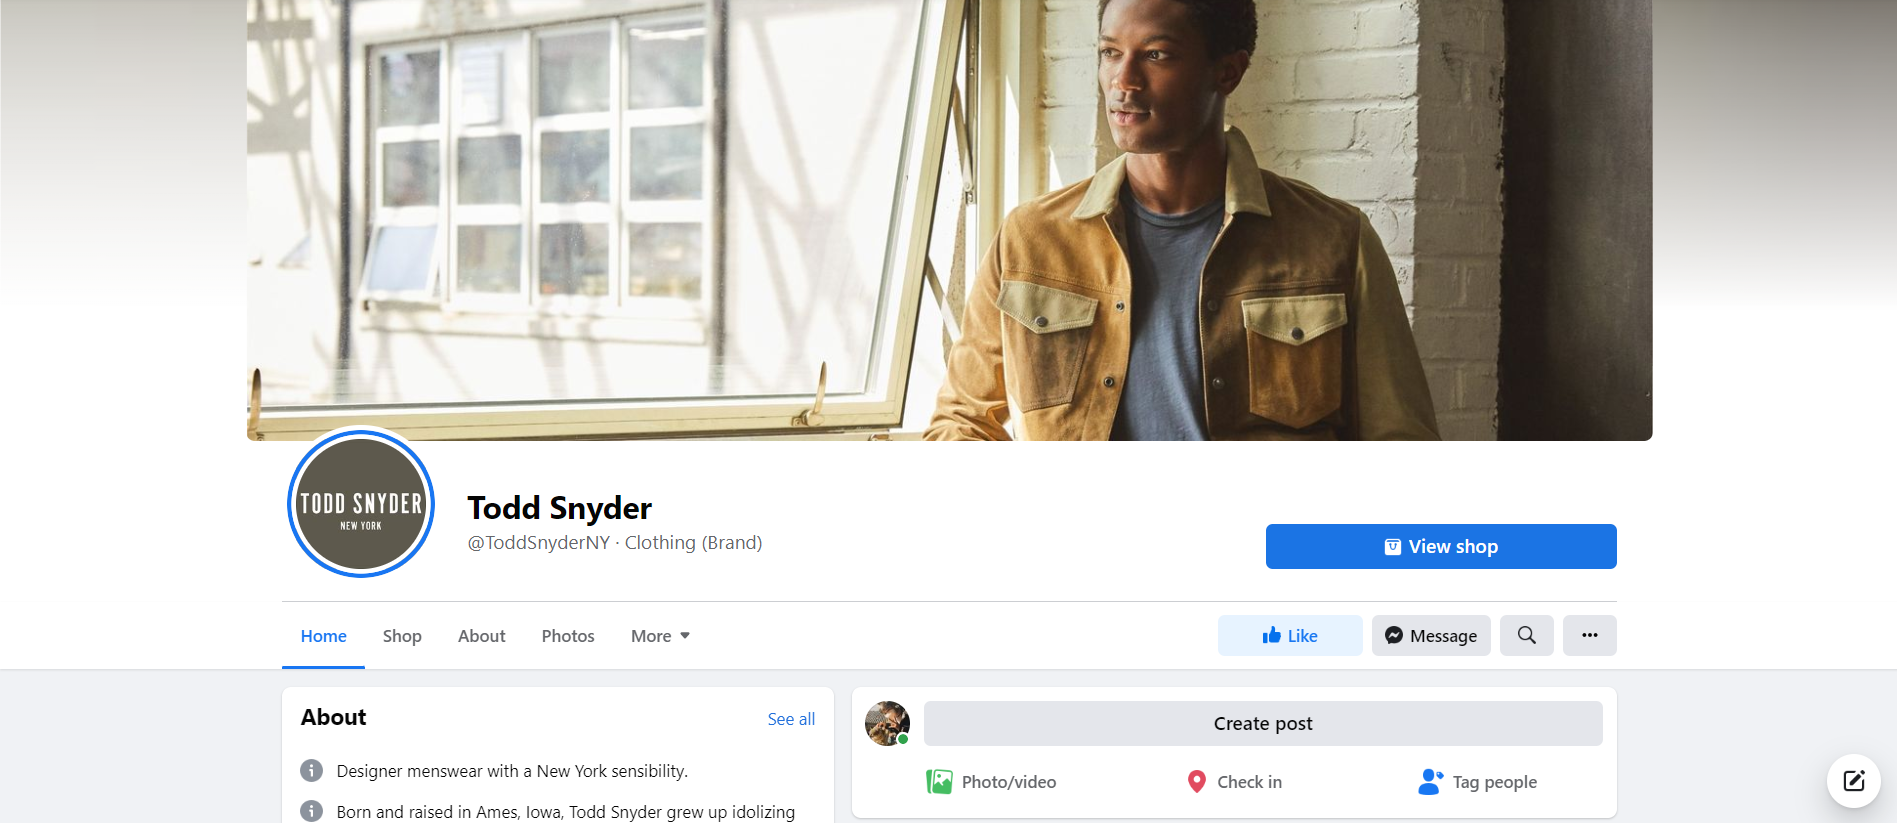 Shopify Facebook Store Example: Todd Snyder